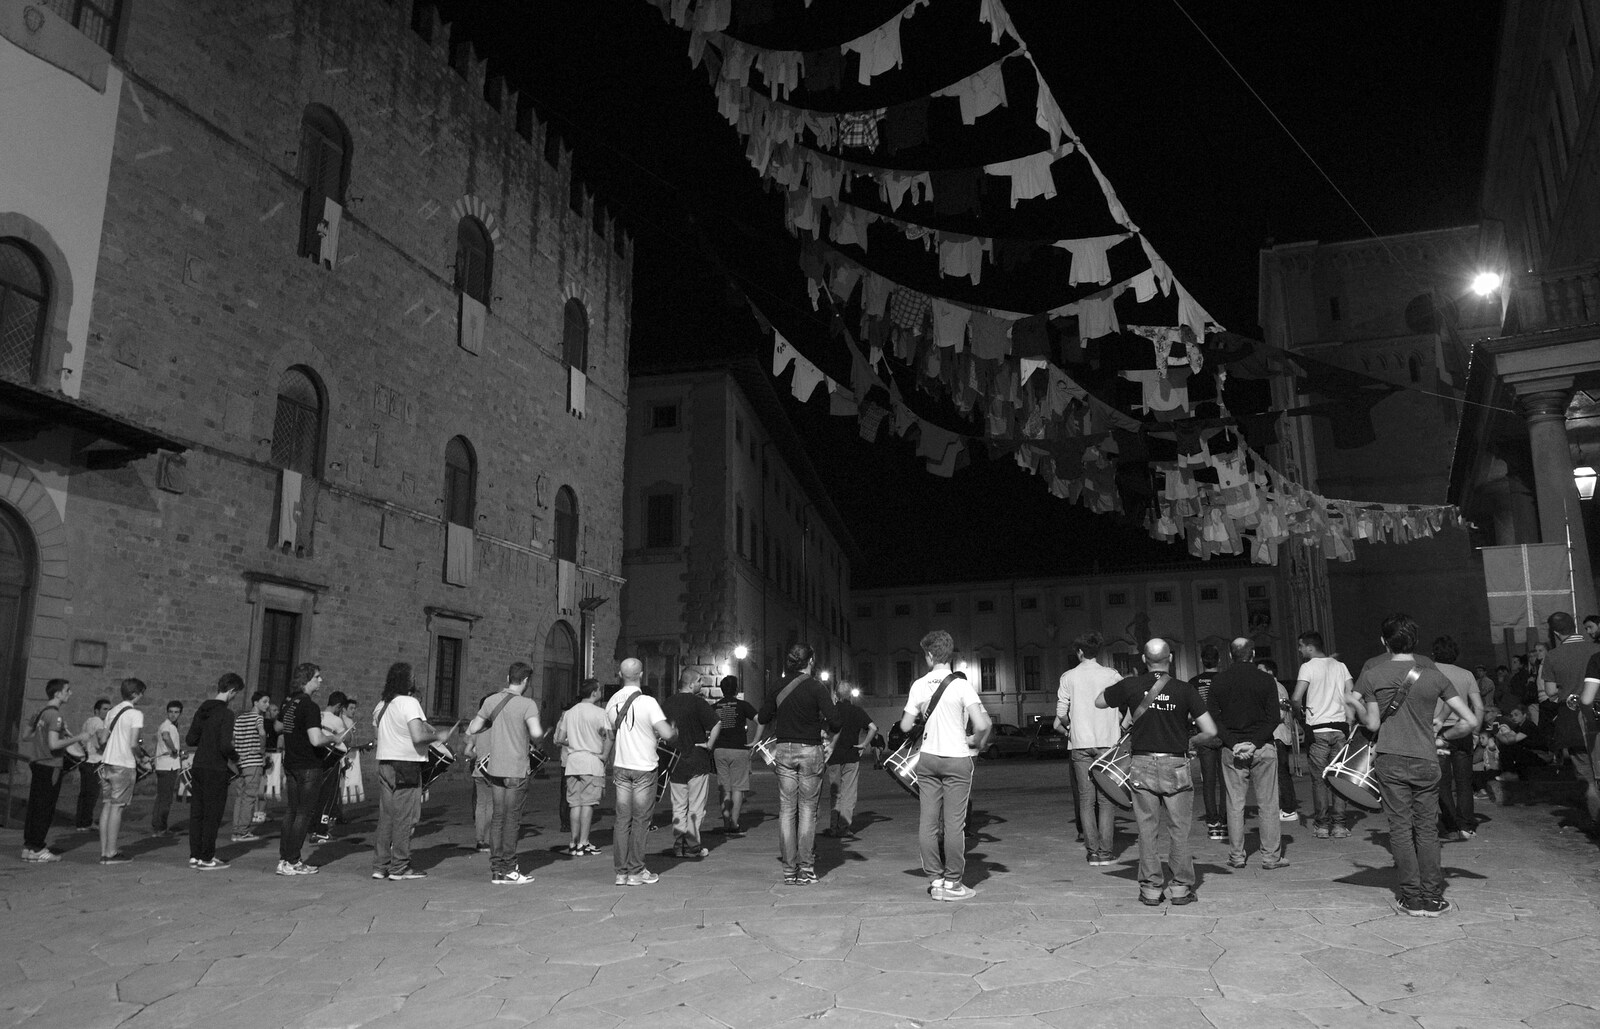 Drums in the square from Italian Weddings, Saracens and Swimming Pools, Arezzo, Tuscany - 12th June 2013